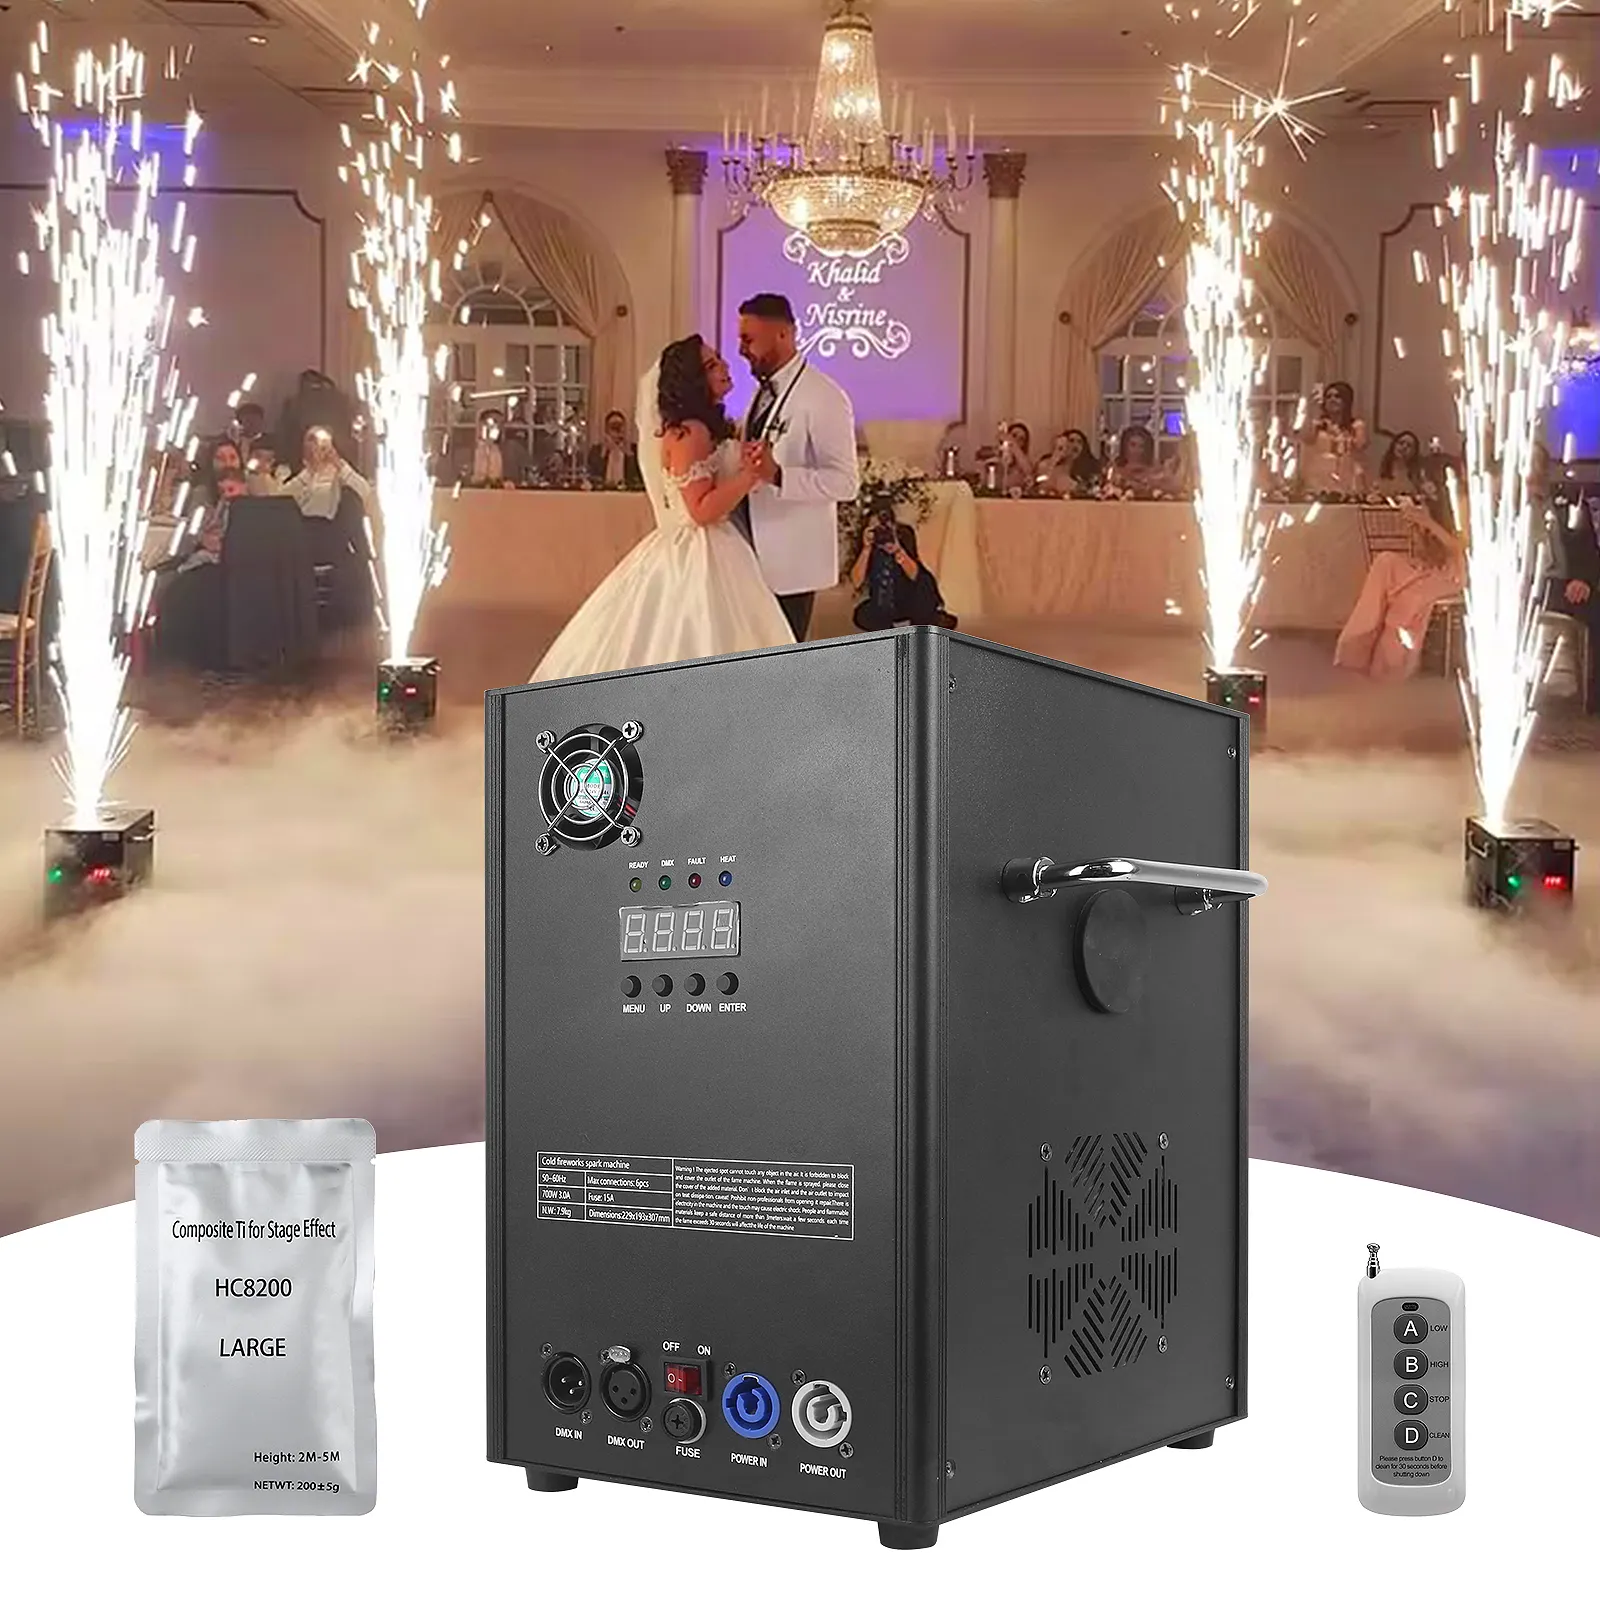 Large style Cold sparkler Machine Cold Spark Machine fountain Fire works for party Wedding Stage Wireless Remote Control flame